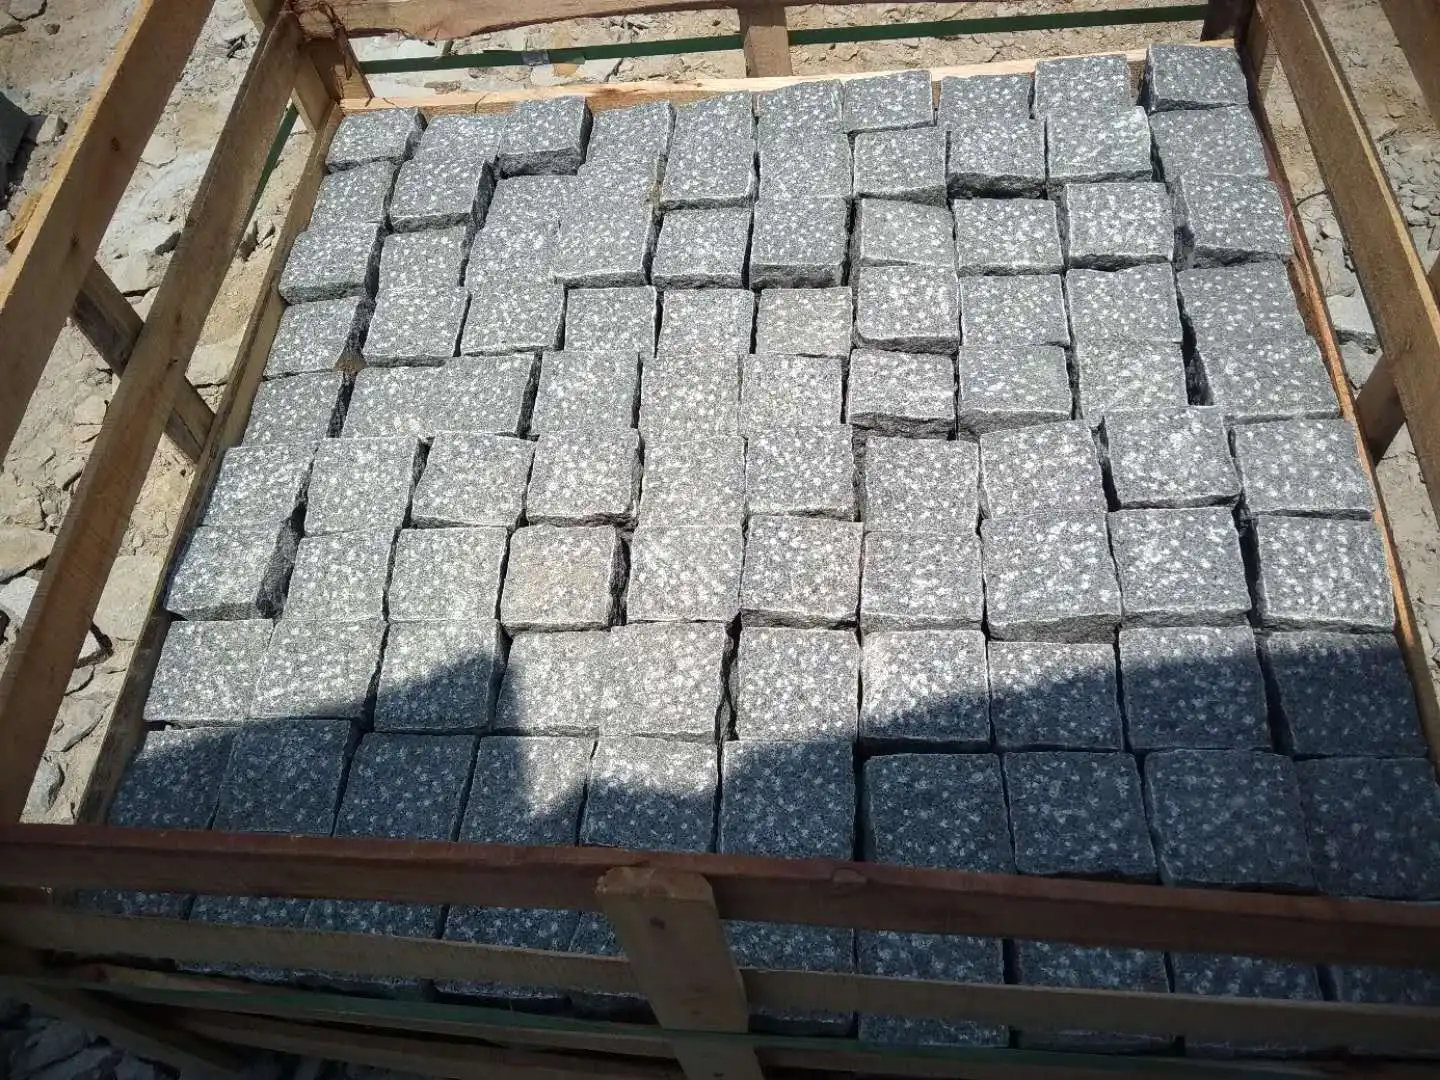 Hot Strongest Handmade Paving Stone for Outdoor Driveway  Cobblestones  9x9x9 Dark Grey 654 Sesame Black Cubic Stone For Sale